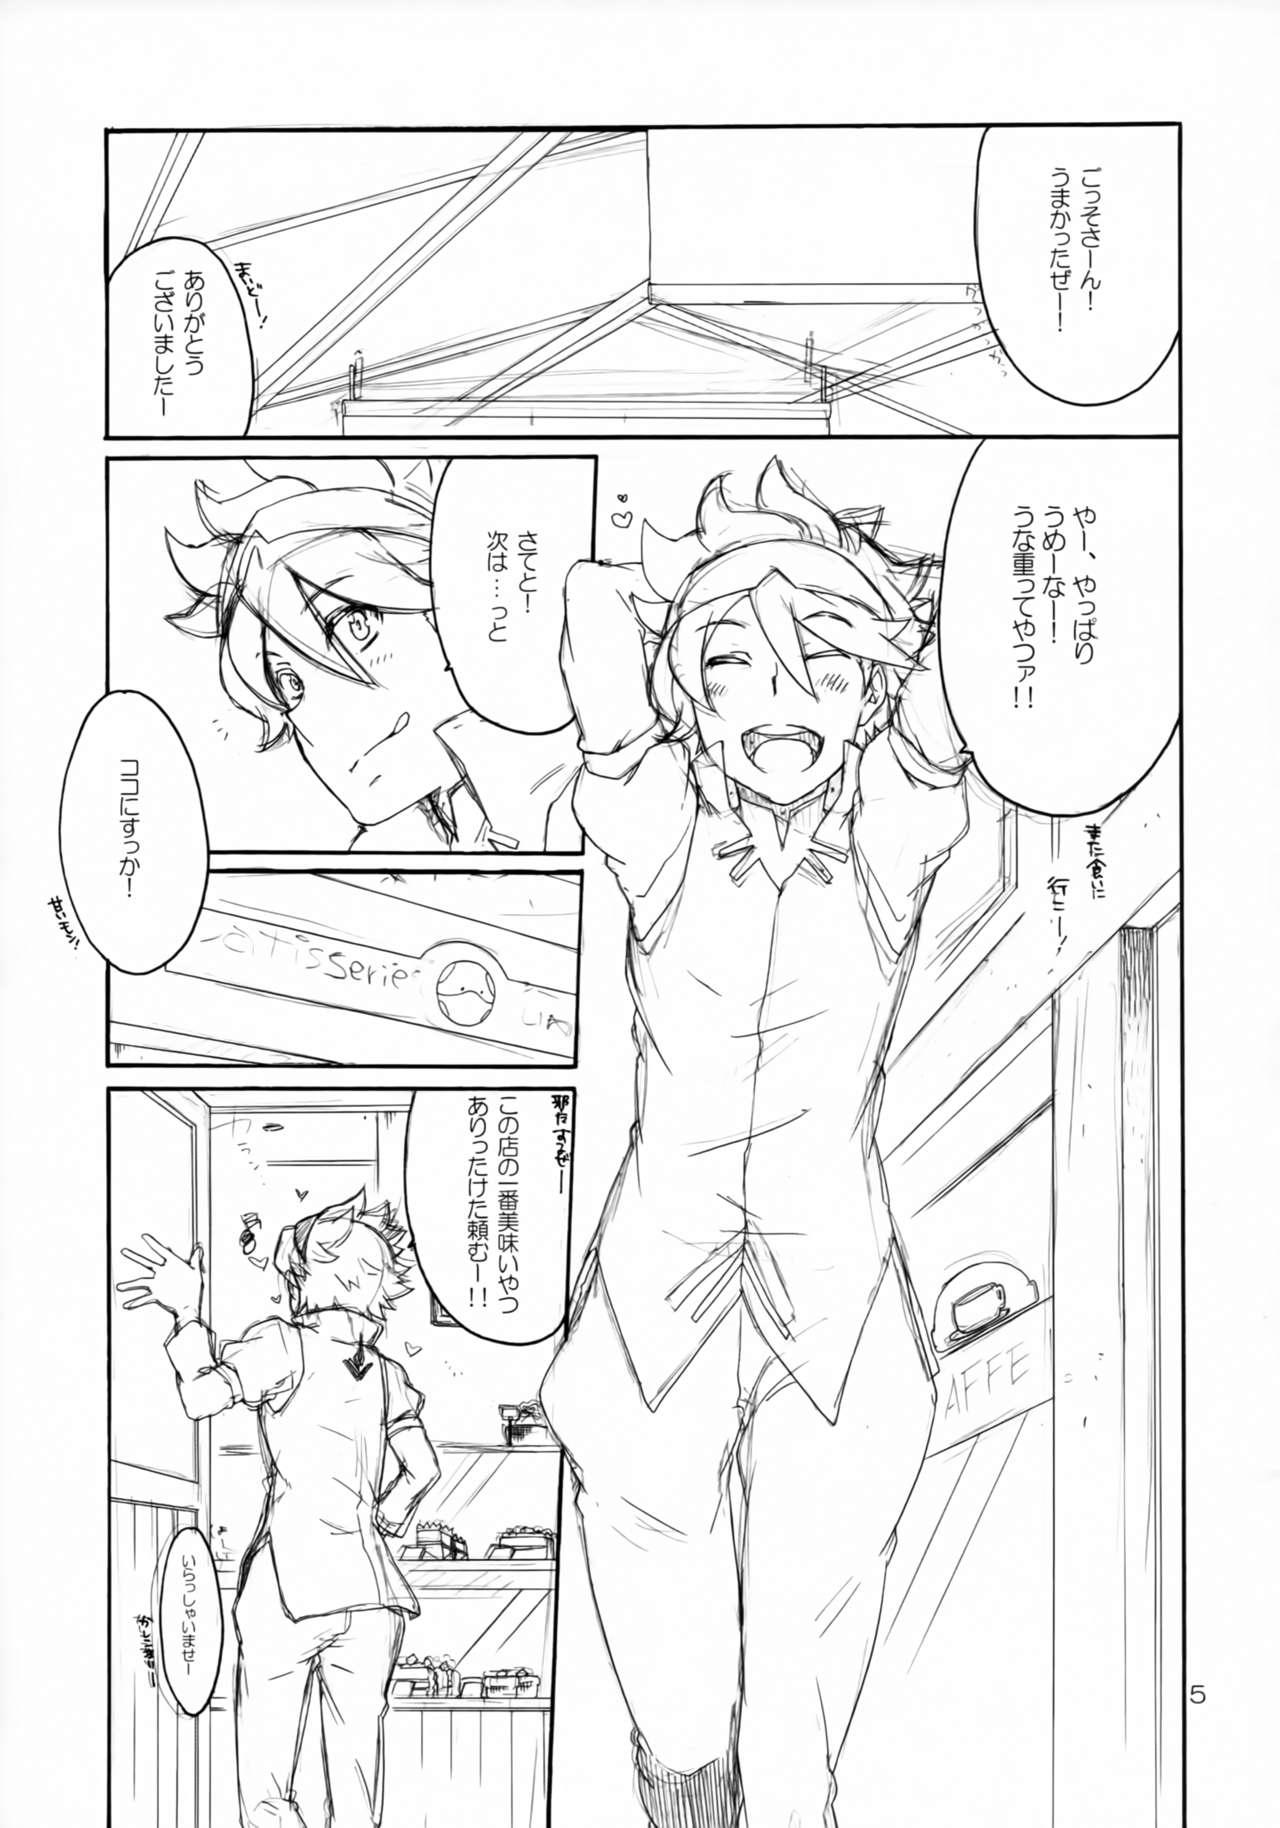 Spying sweets panic - Gundam build fighters Bj - Page 4